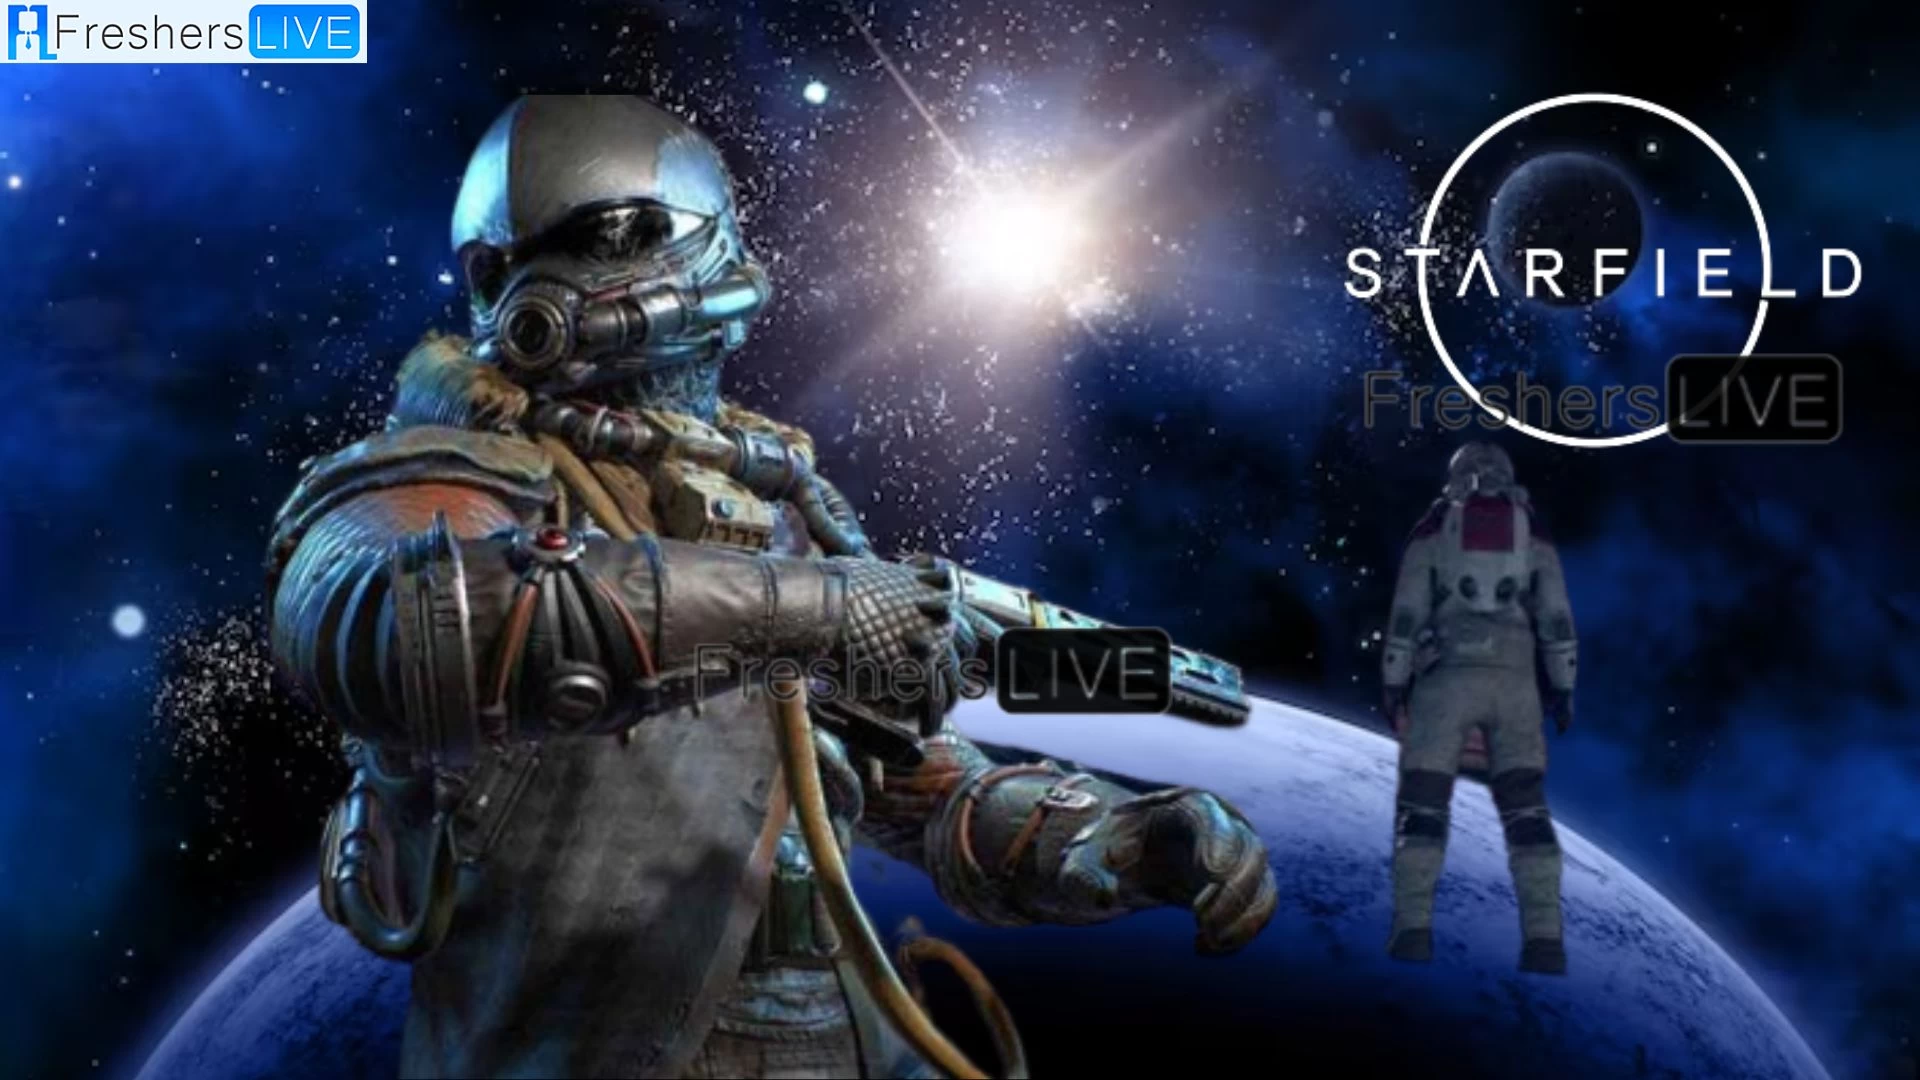 Starfield Kill Rusty Or Not, Gameplay and Trailer